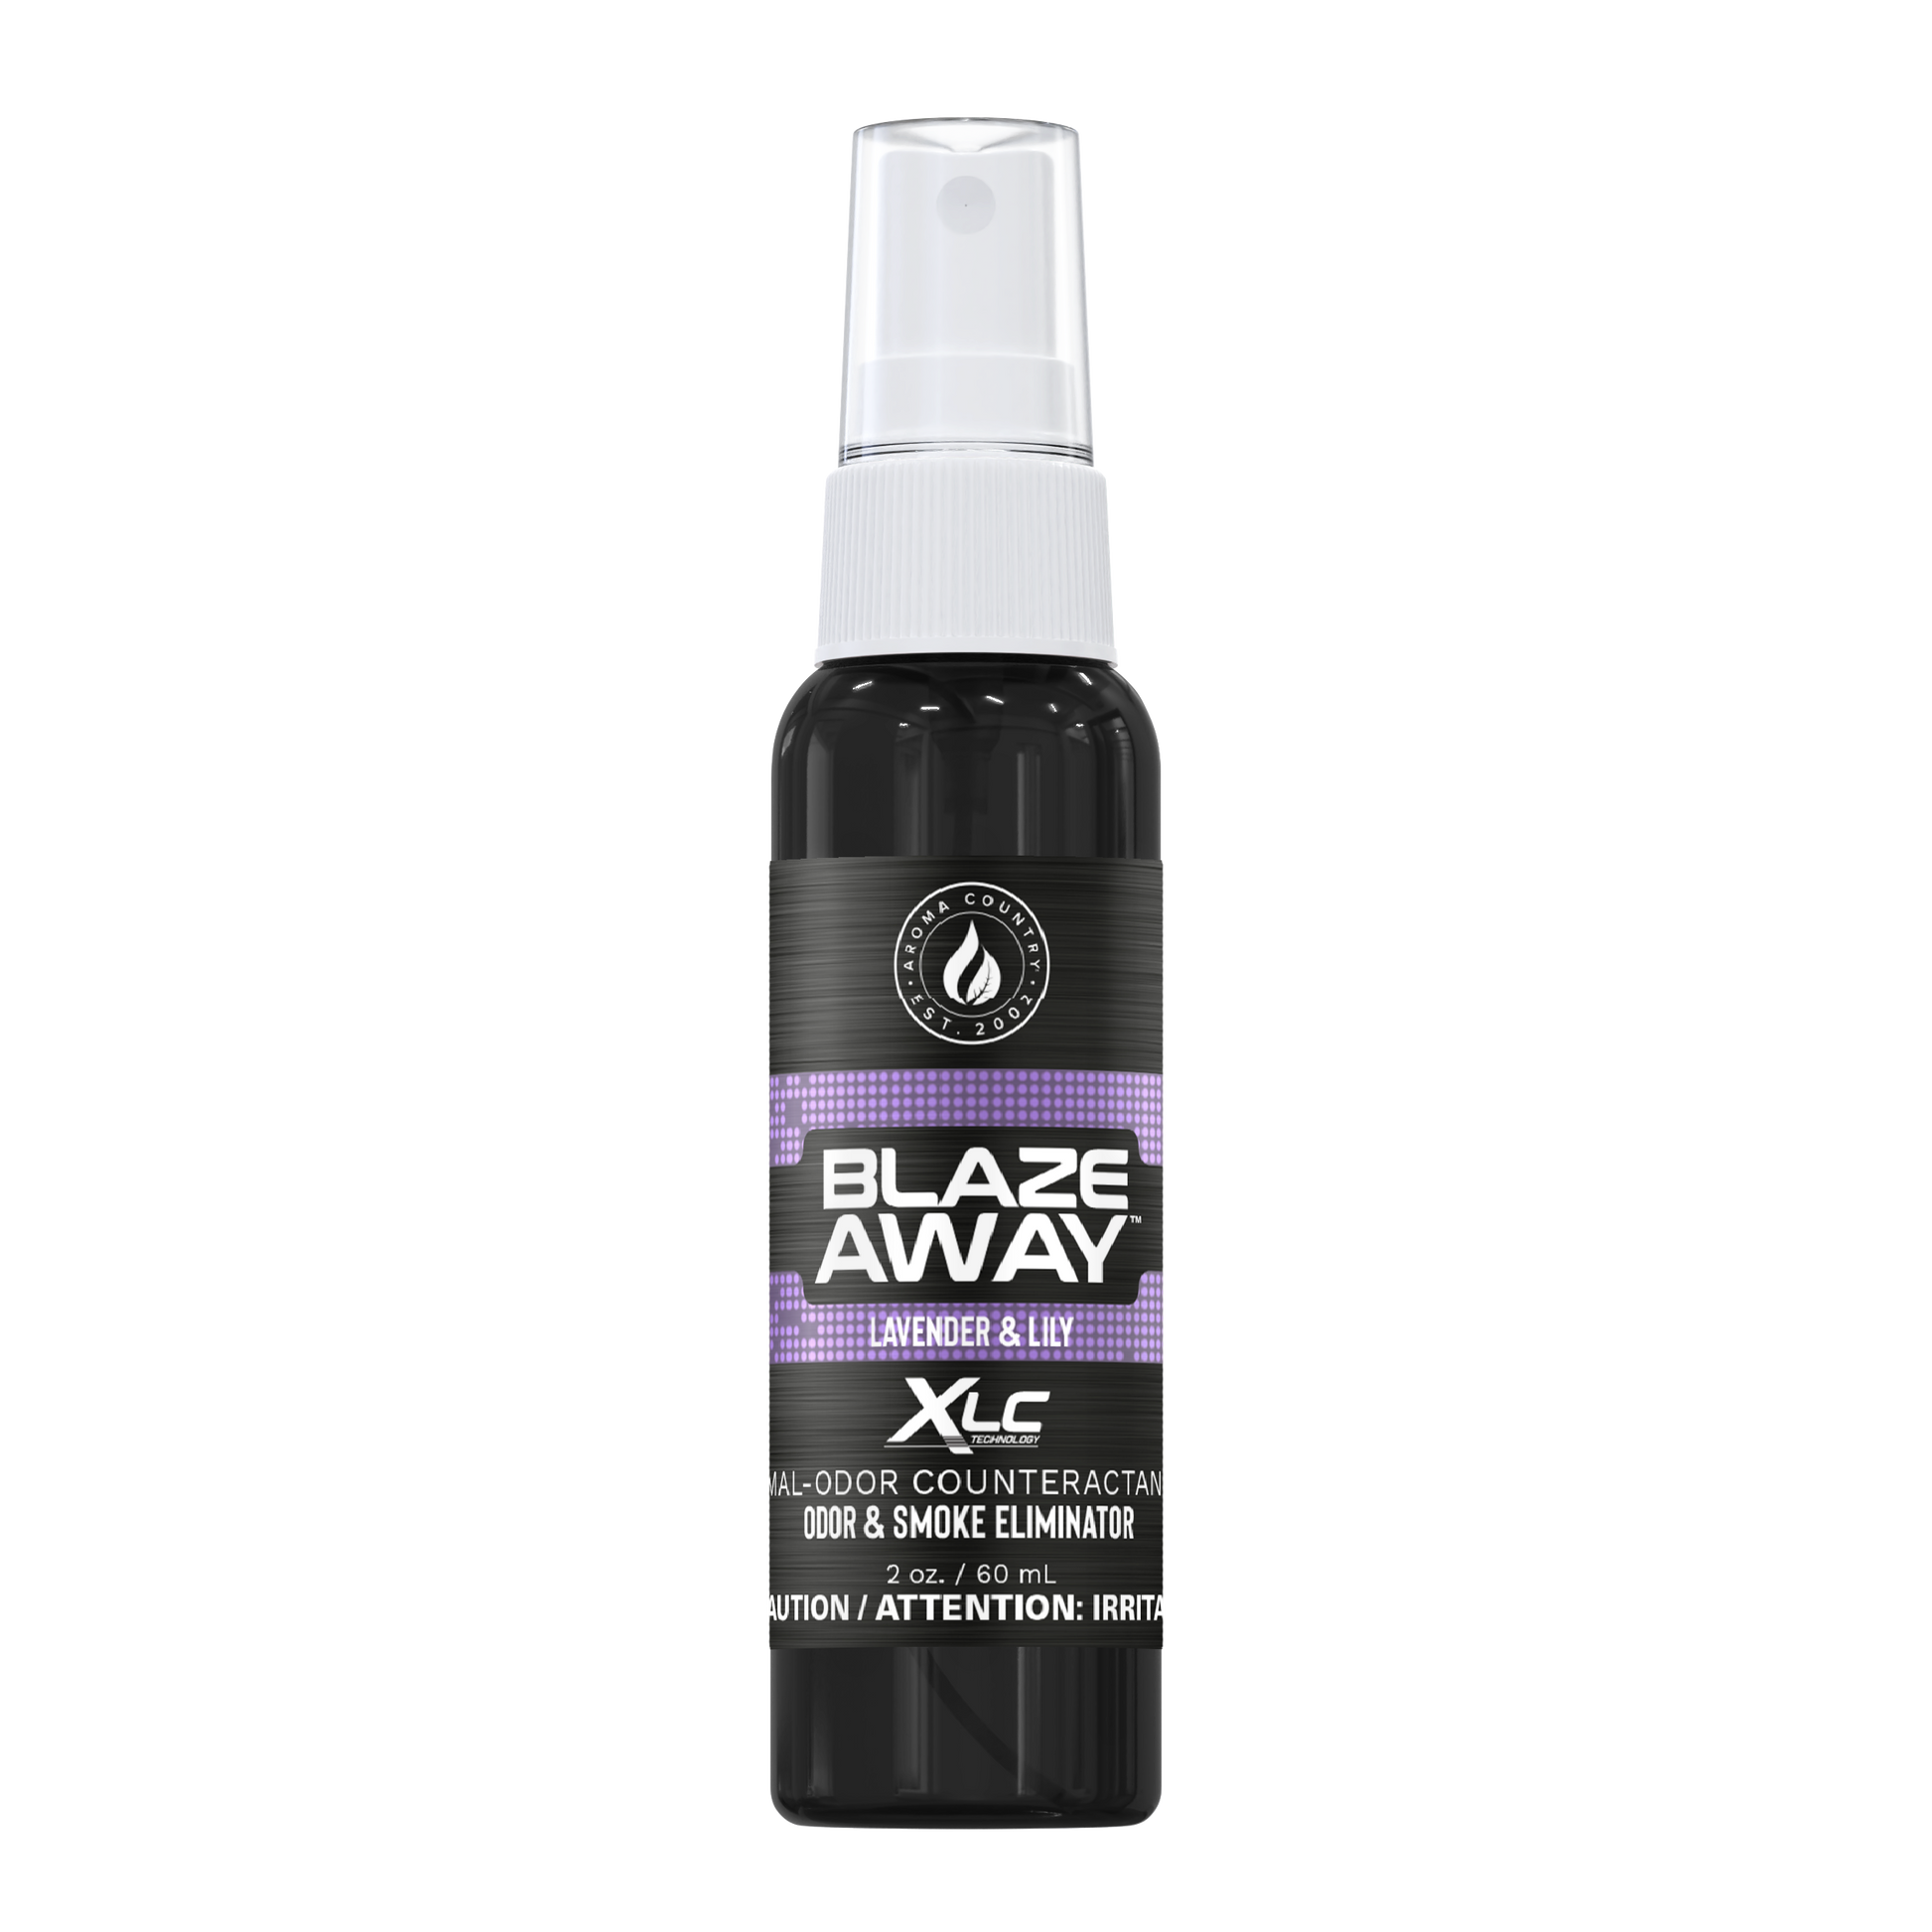 2 ounce Lavender and Lily Mal-odor Counteractant.